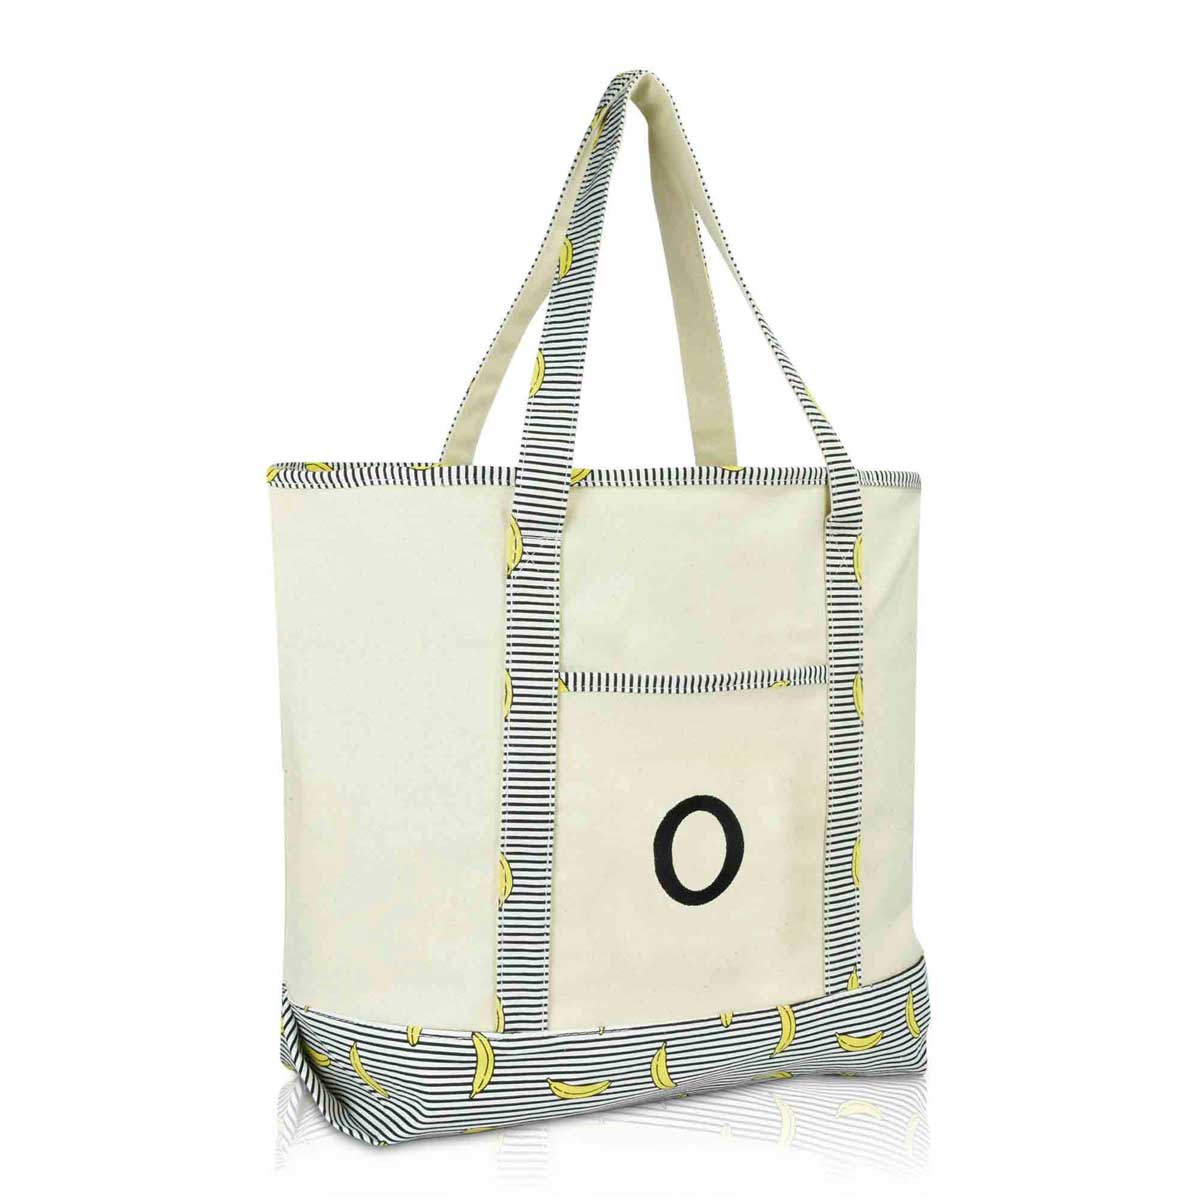 Dalix Initial Tote Bag Personalized Monogram Zippered Top Letter - O